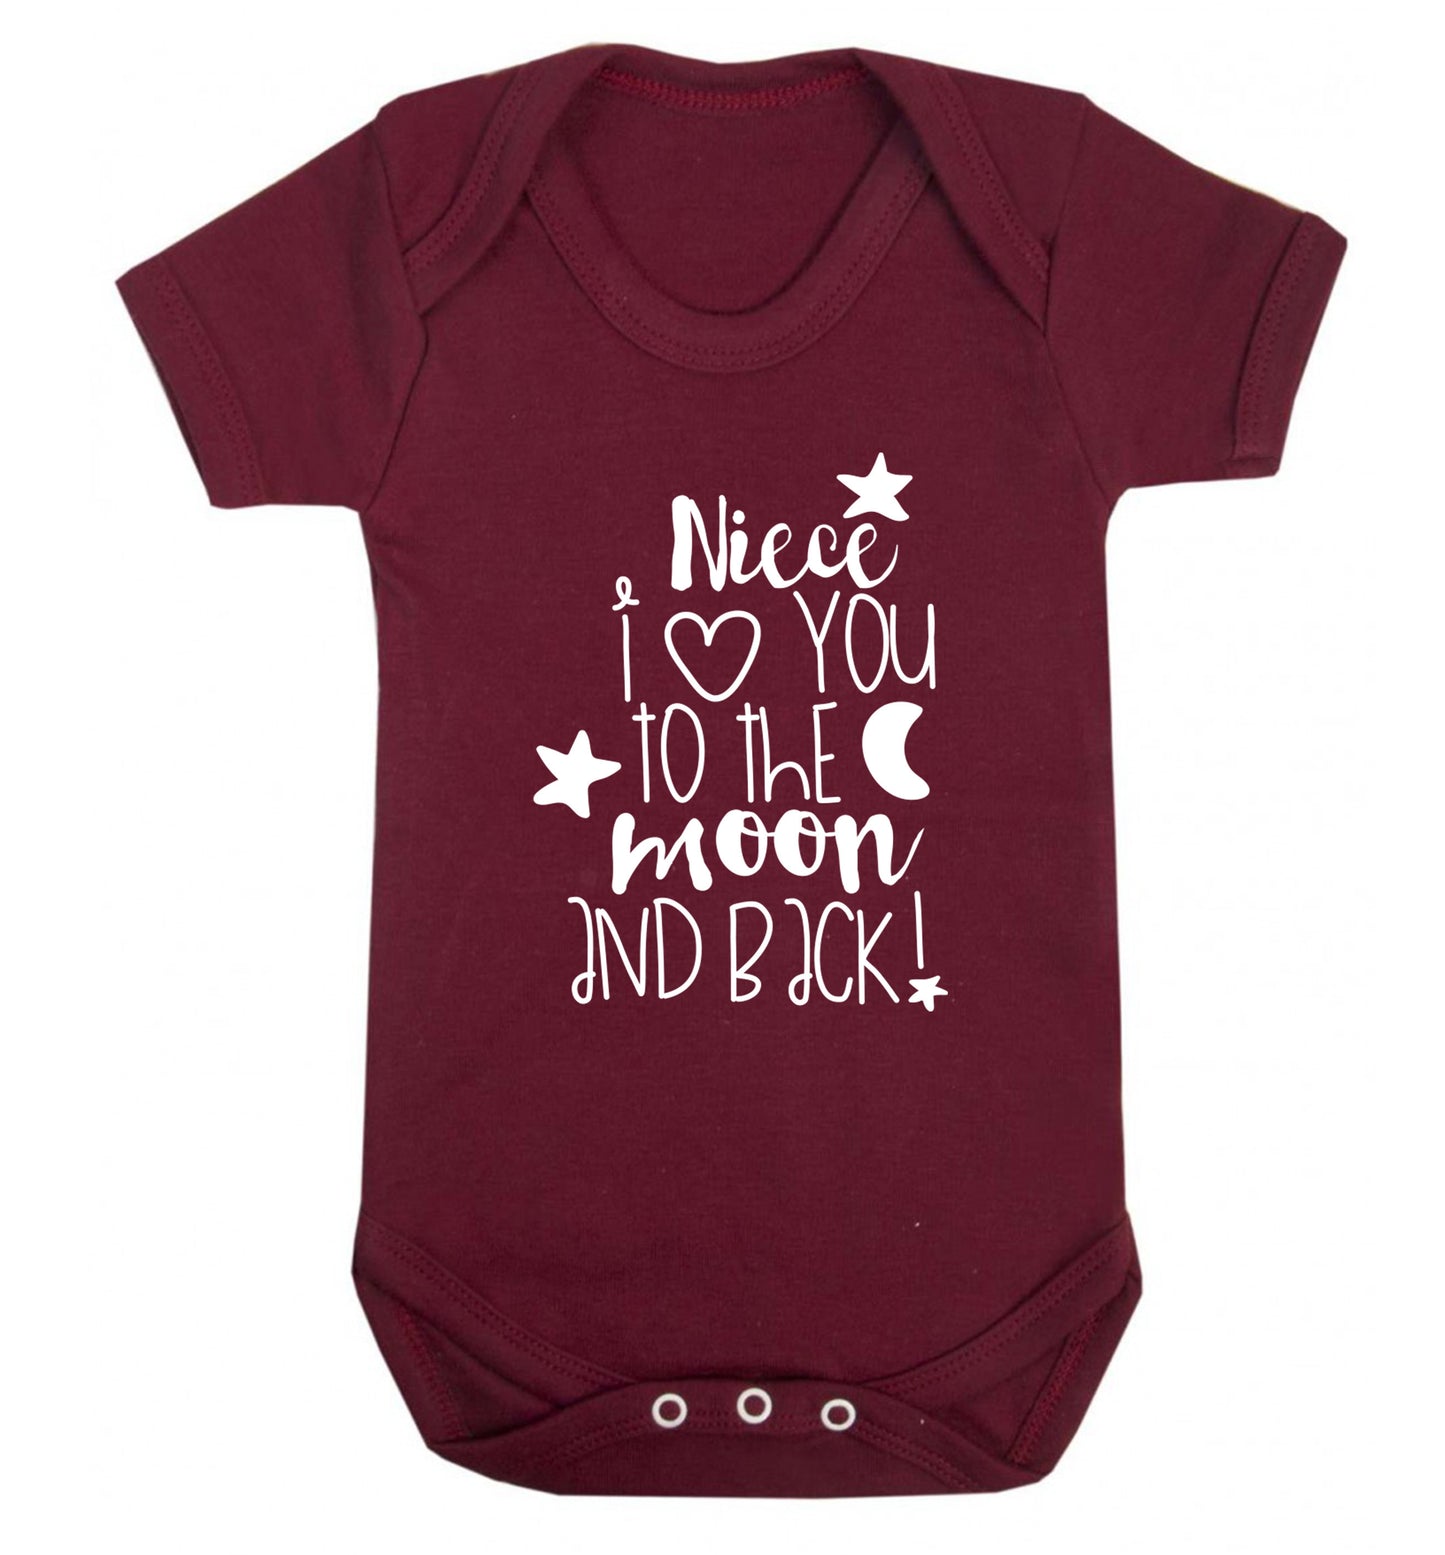 Niece I love you to the moon and back Baby Vest maroon 18-24 months